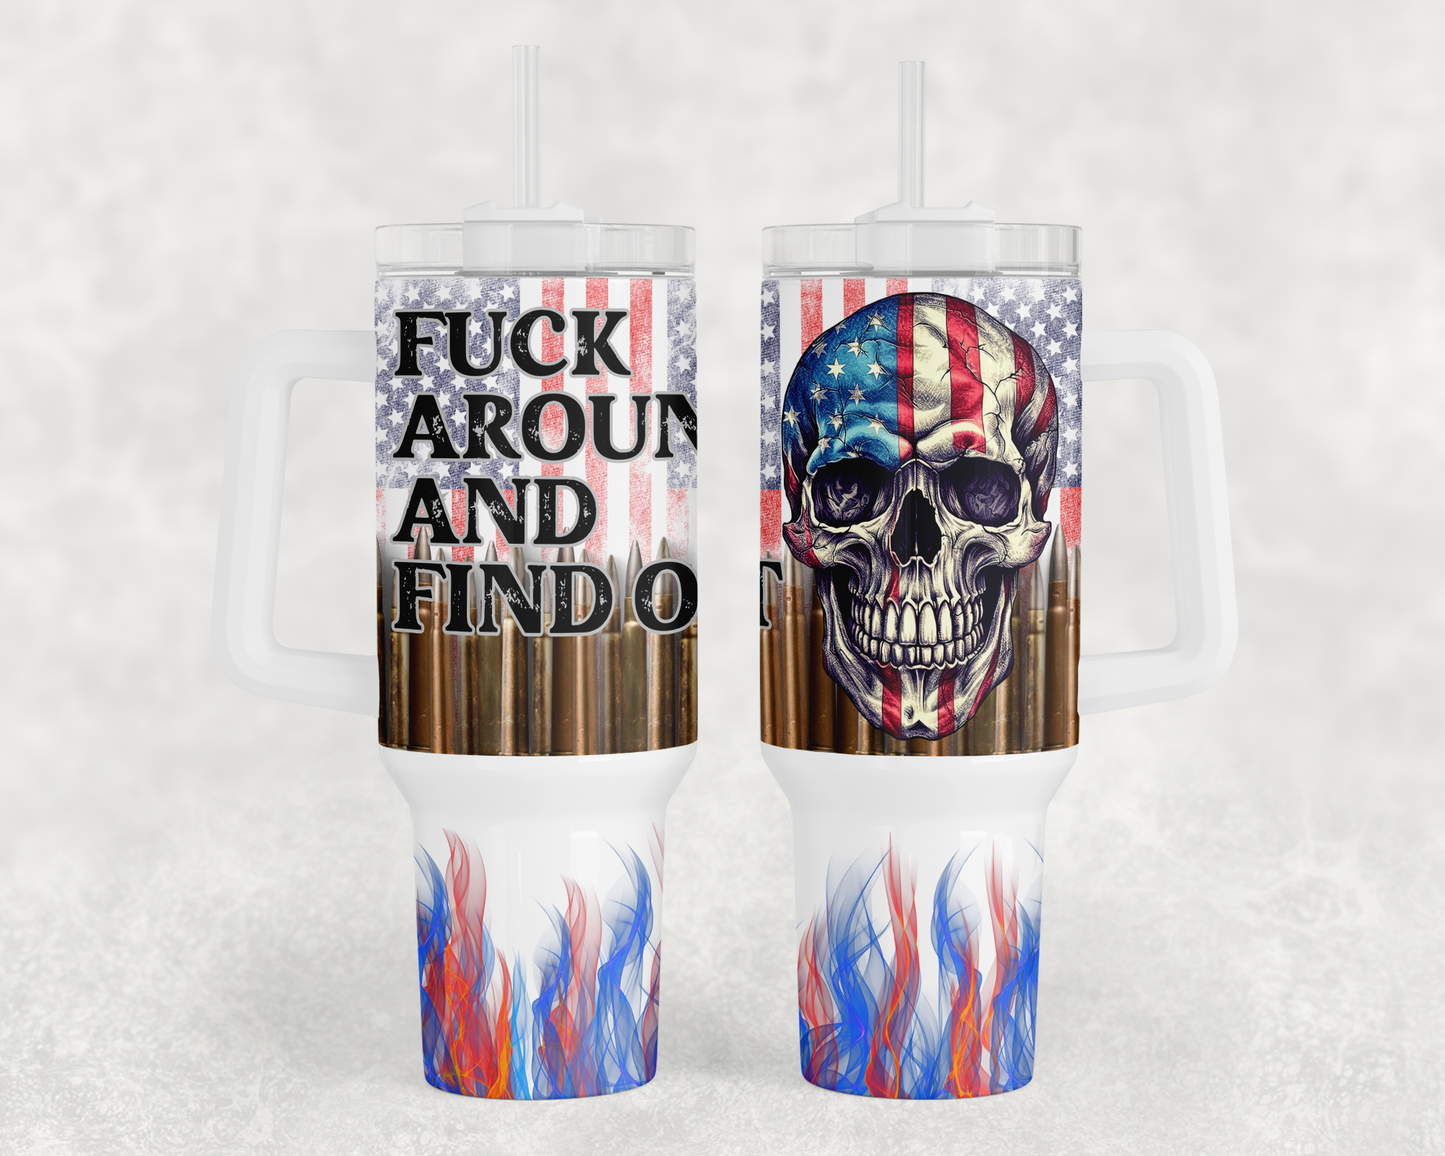 Fuck around and find out tumbler with handle. Design is a skull head with bullets and U.S. flag.